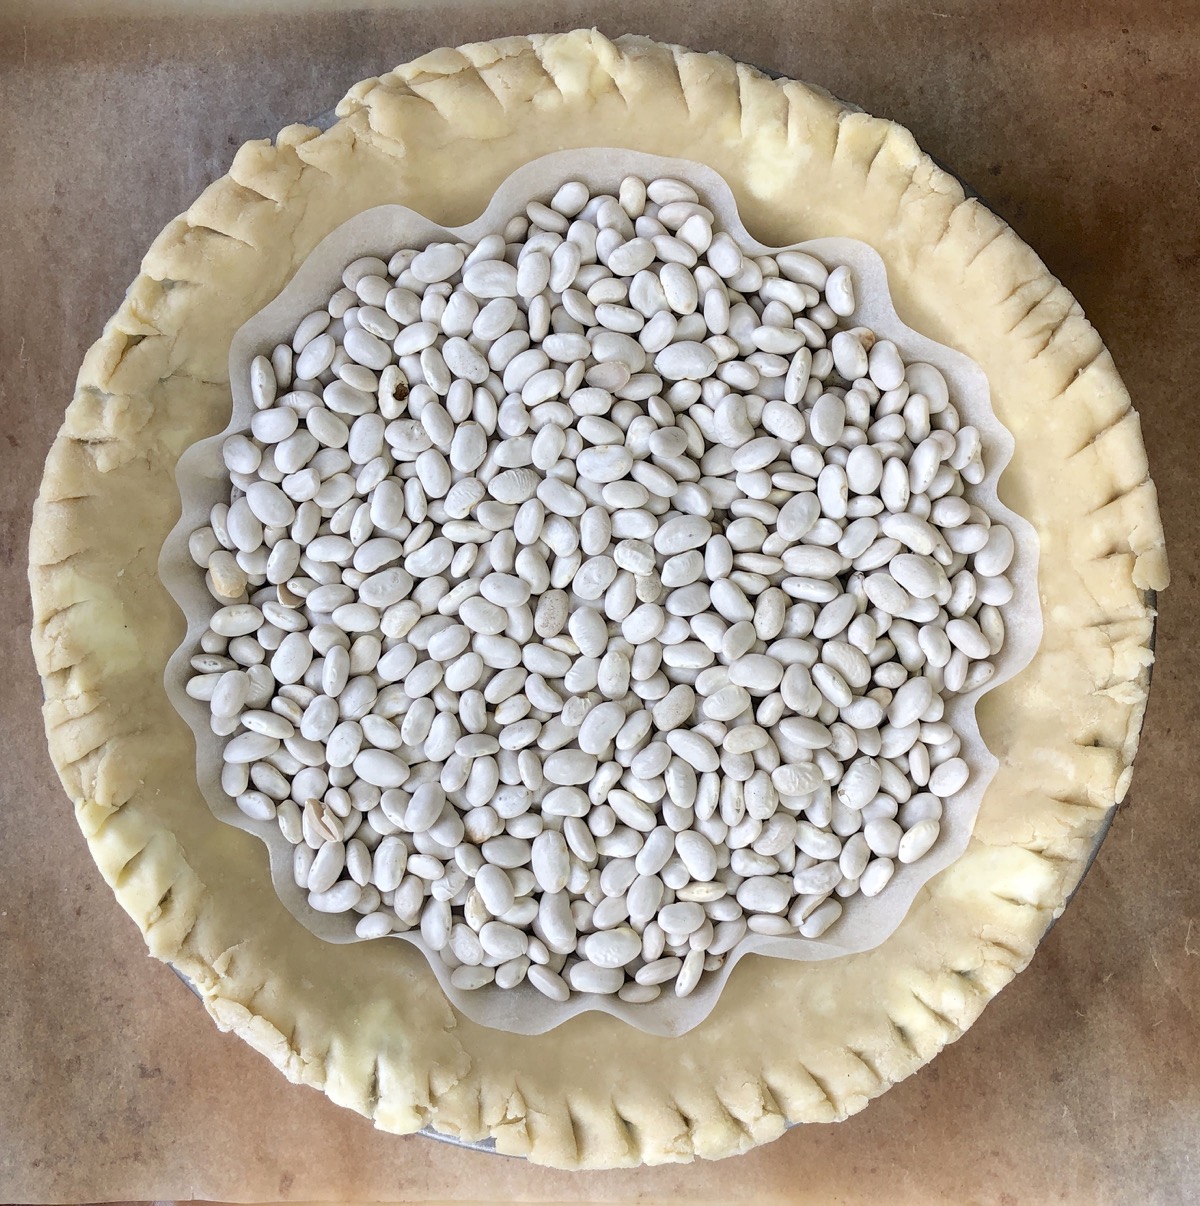 Unbaked pie crust lined with parchment and partially filled with dry beans, to weigh it down as it prebakes.